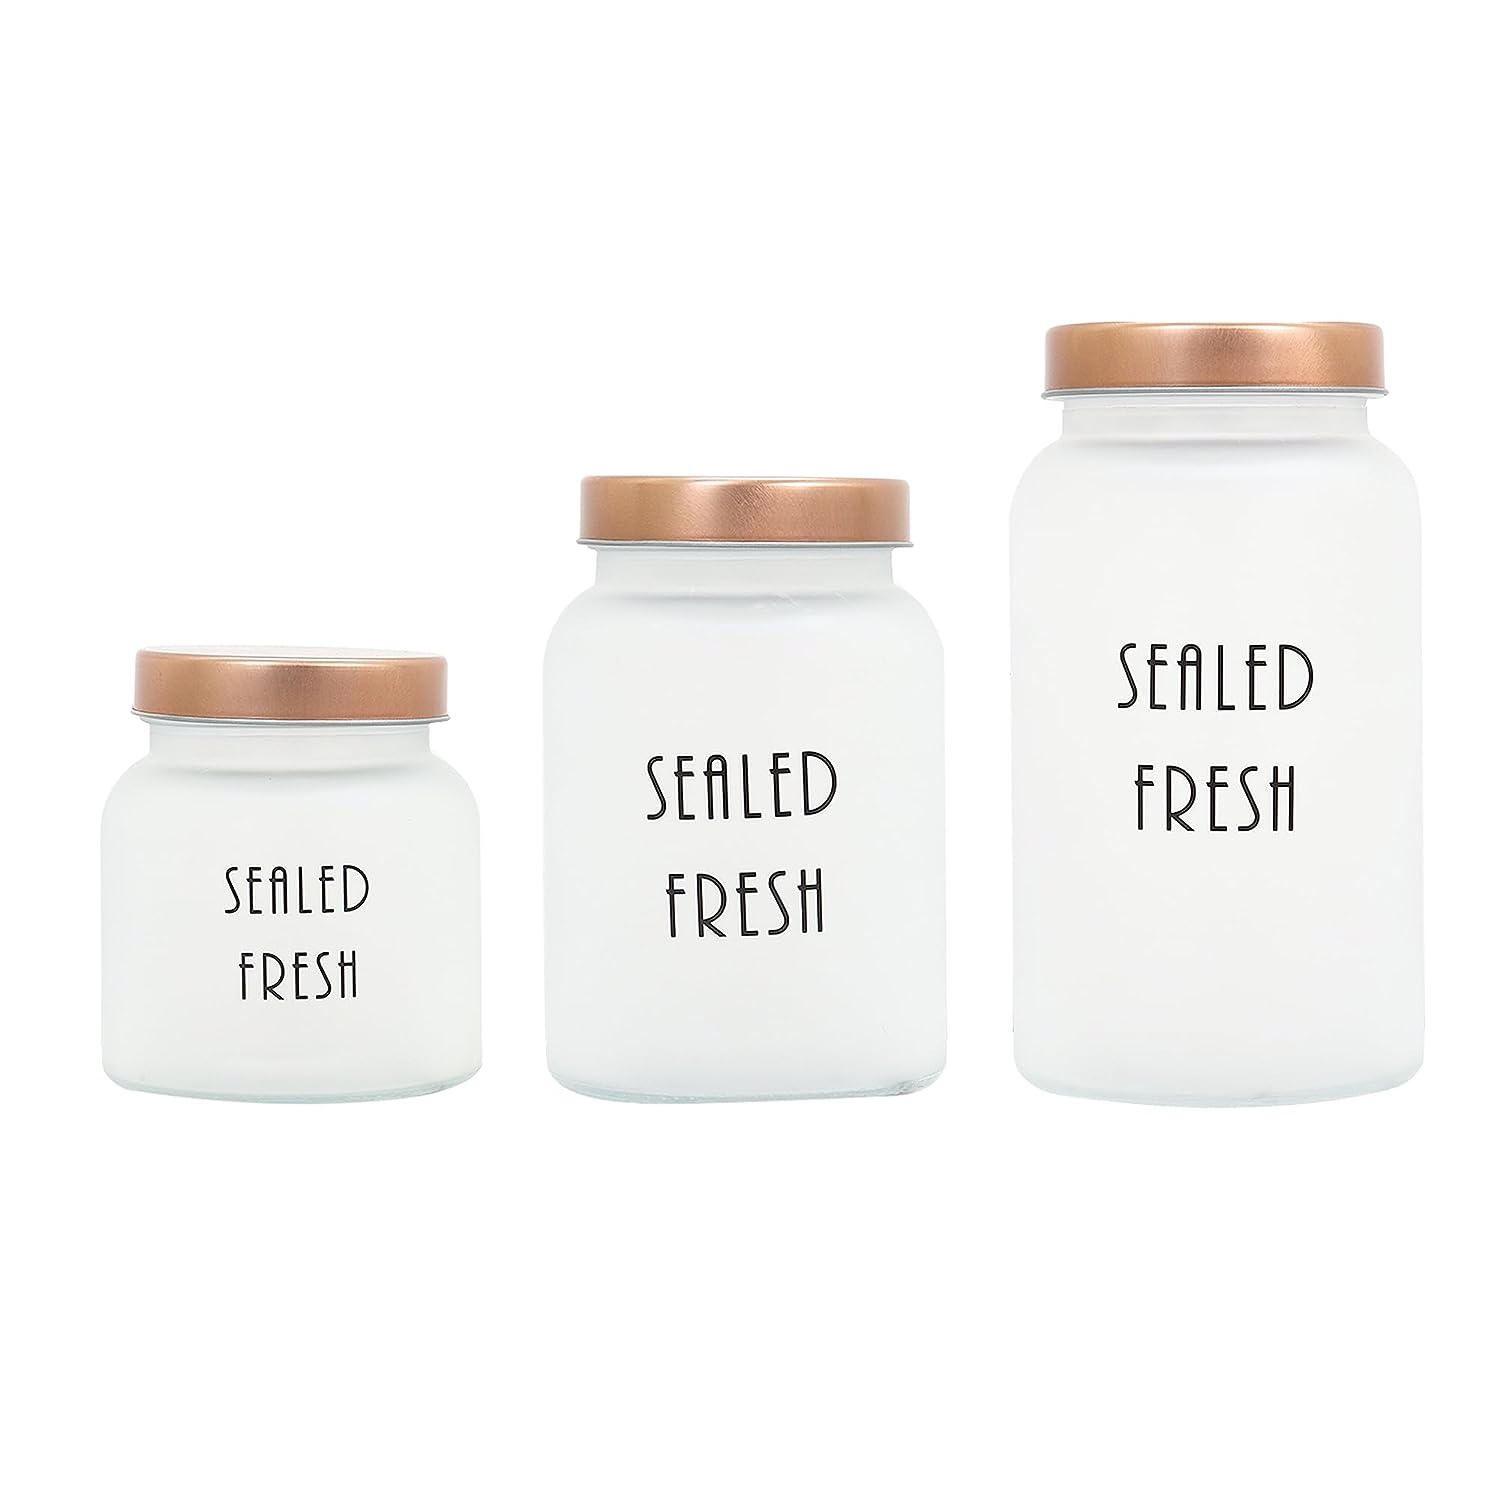 Frosted Glass Jar for Kitchen Storage Gold Lid, 700, 1000, 1500 ml,3 Pcs Set, Free Replacement of Lids